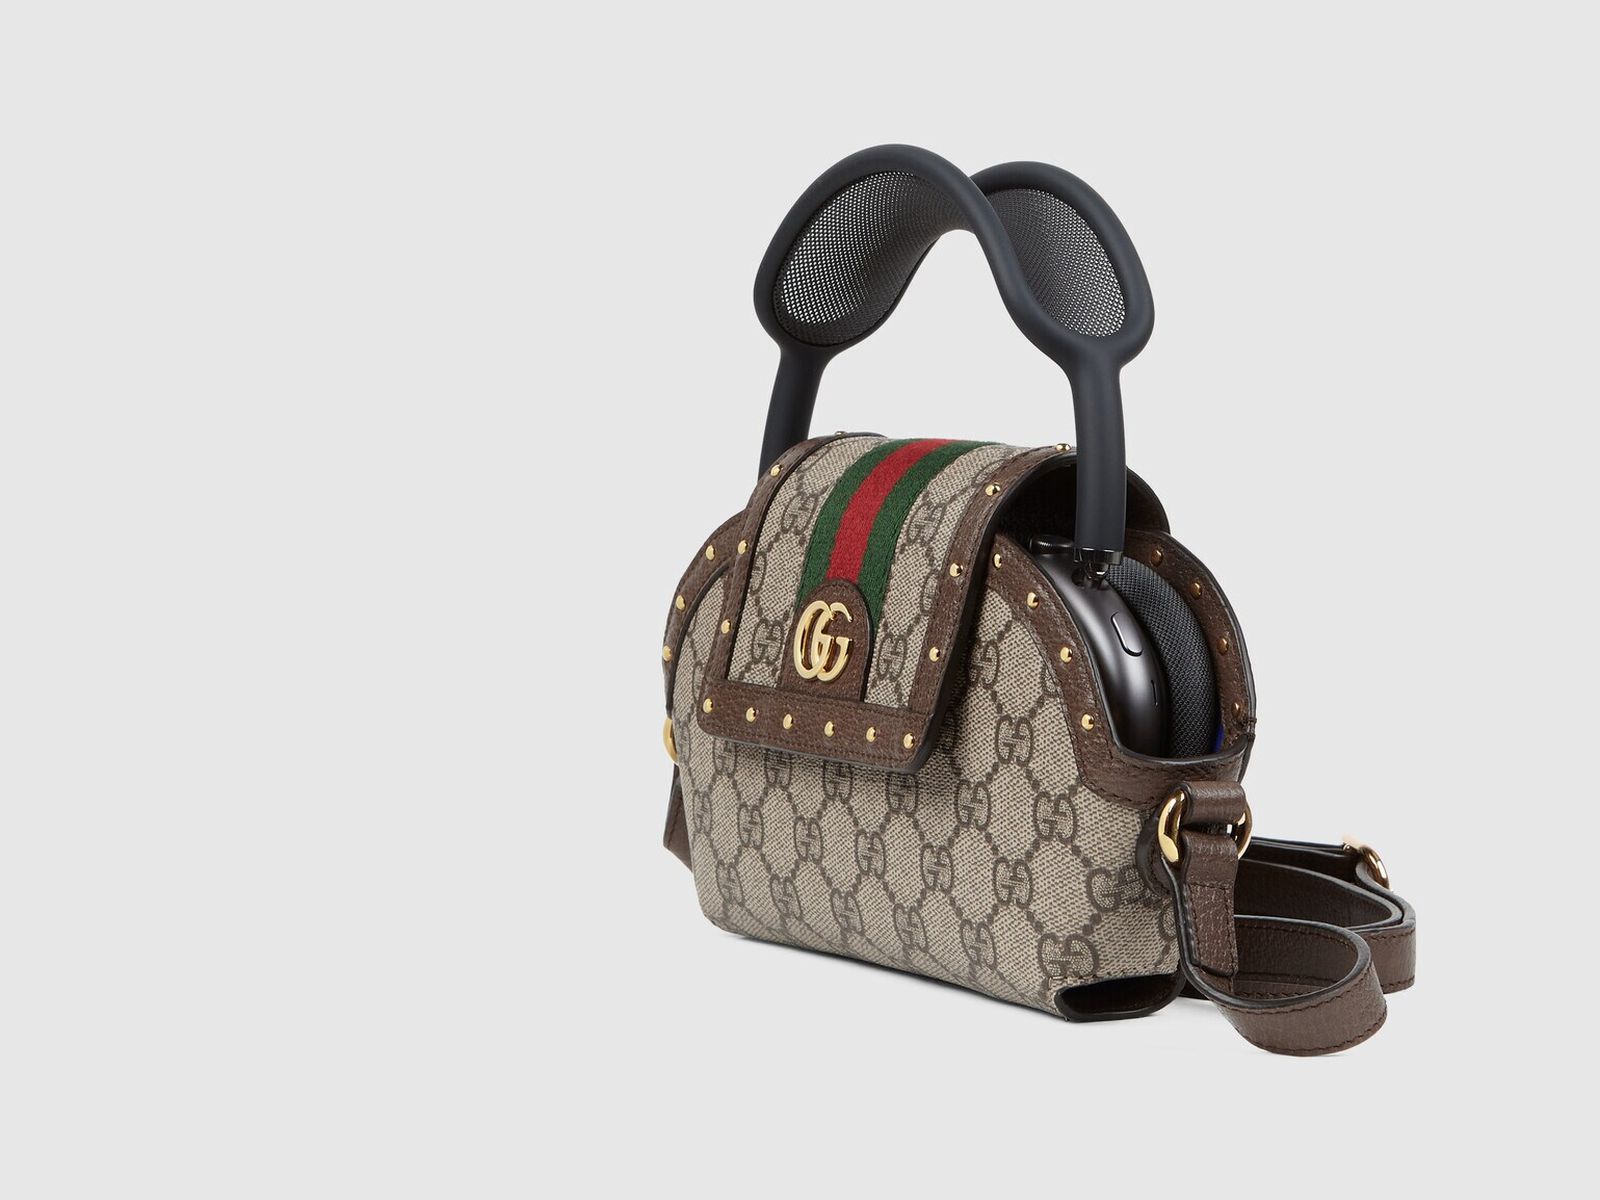 Gucci Releases $980 Case for $549 AirPods Max - MacRumors